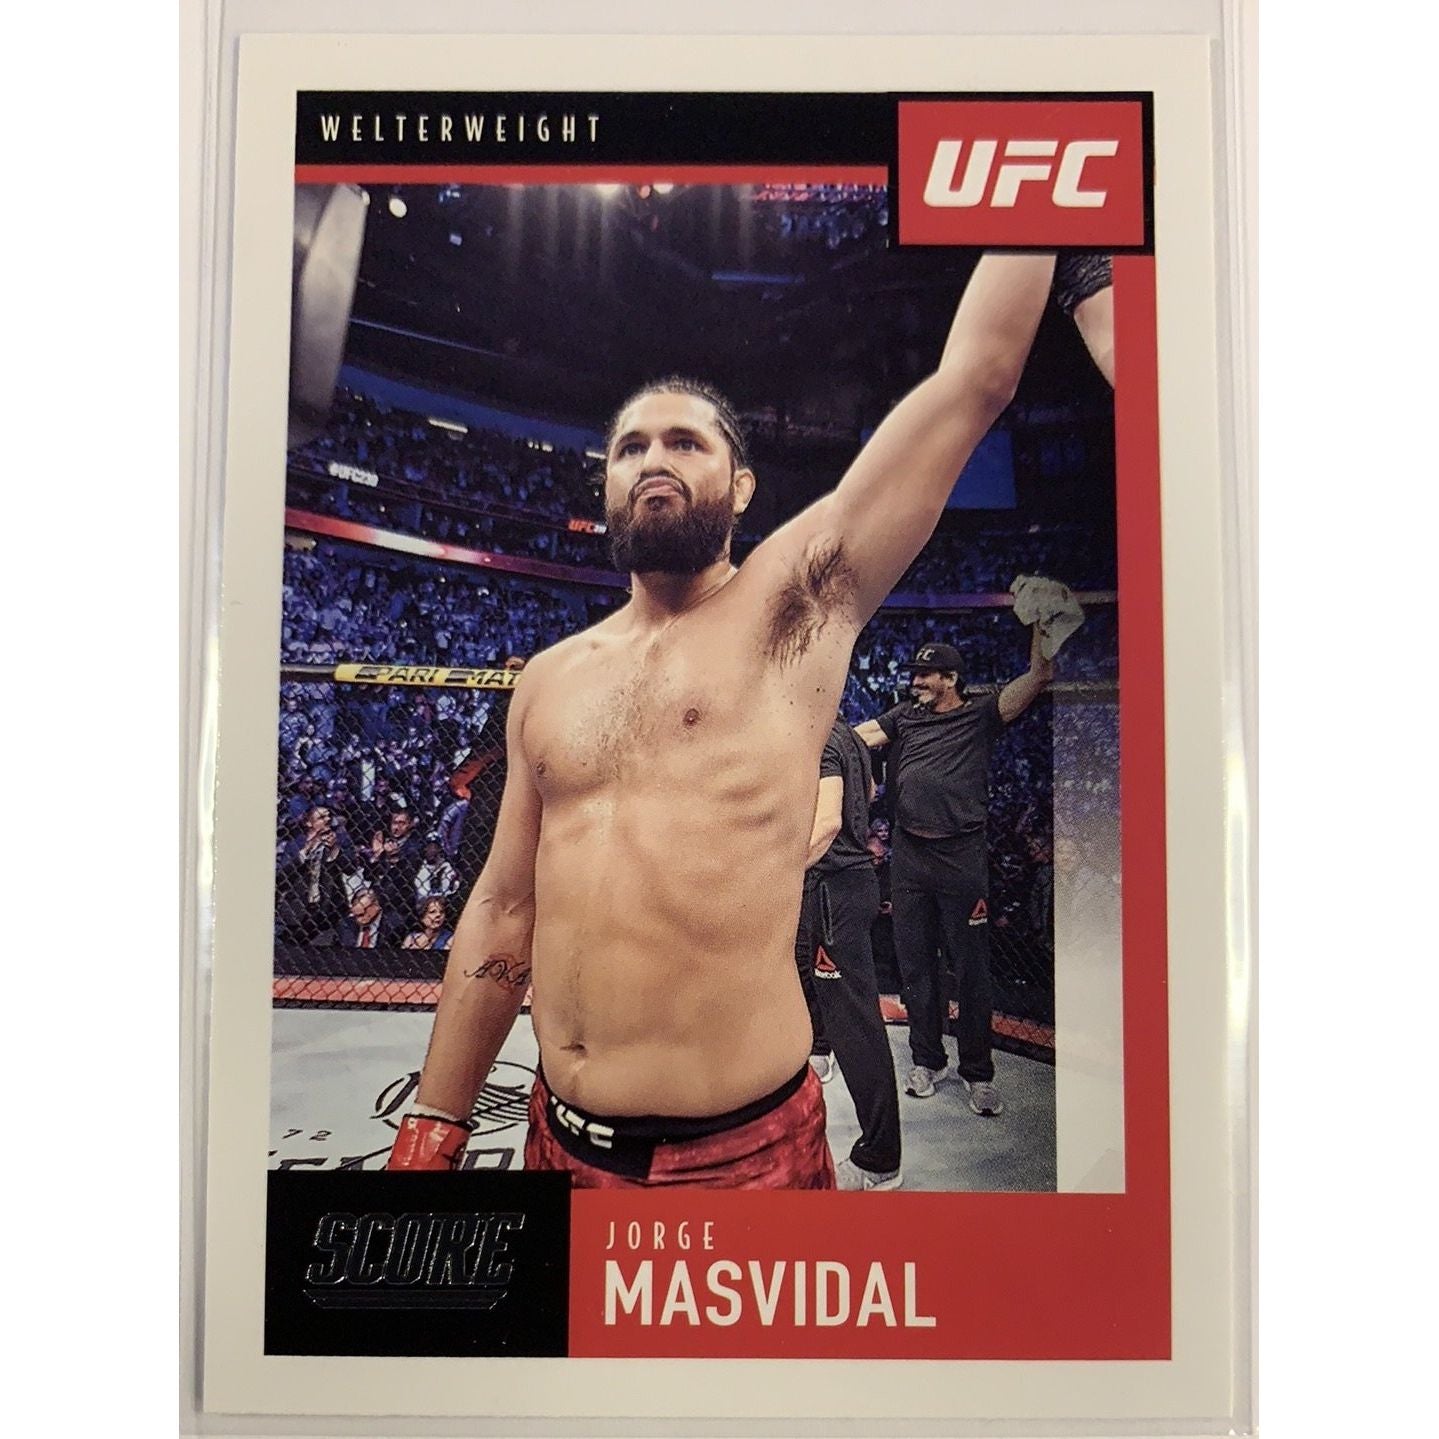  2021 Panini Chronicles Score Jorge Masvidal  Local Legends Cards & Collectibles